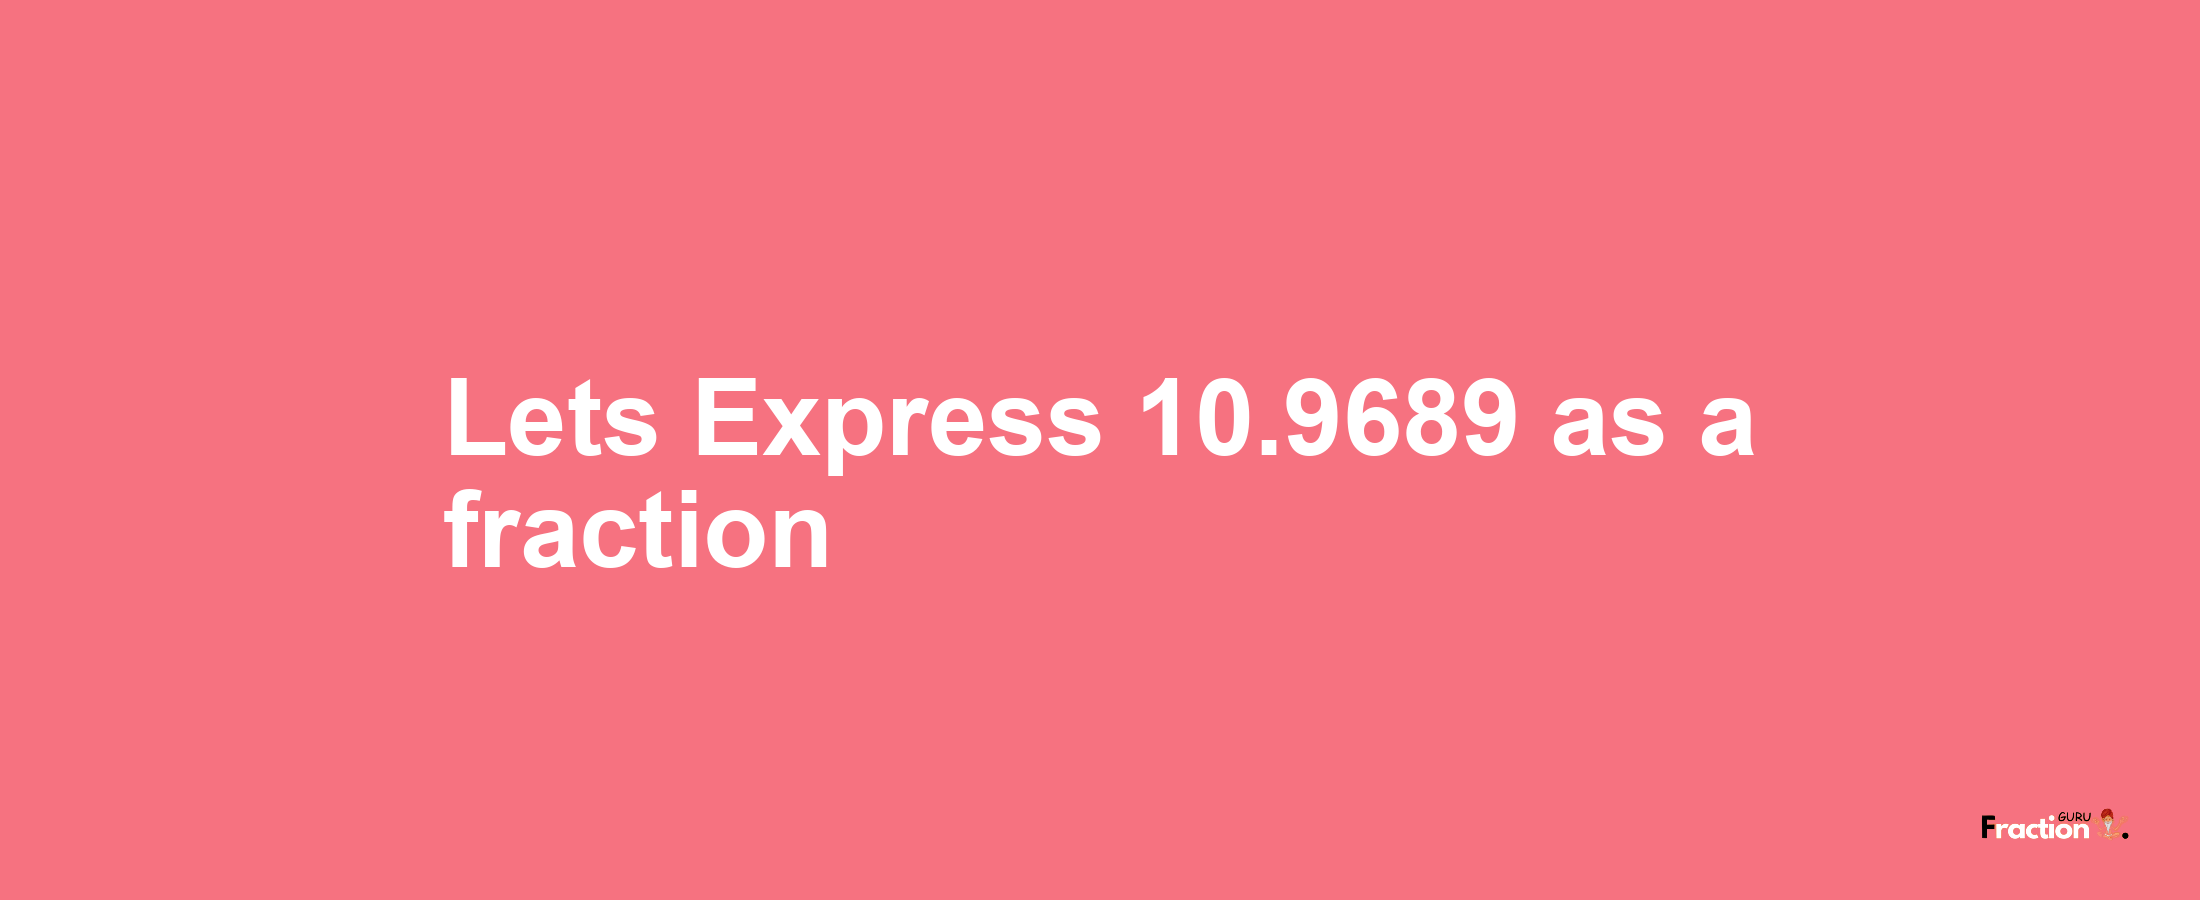 Lets Express 10.9689 as afraction